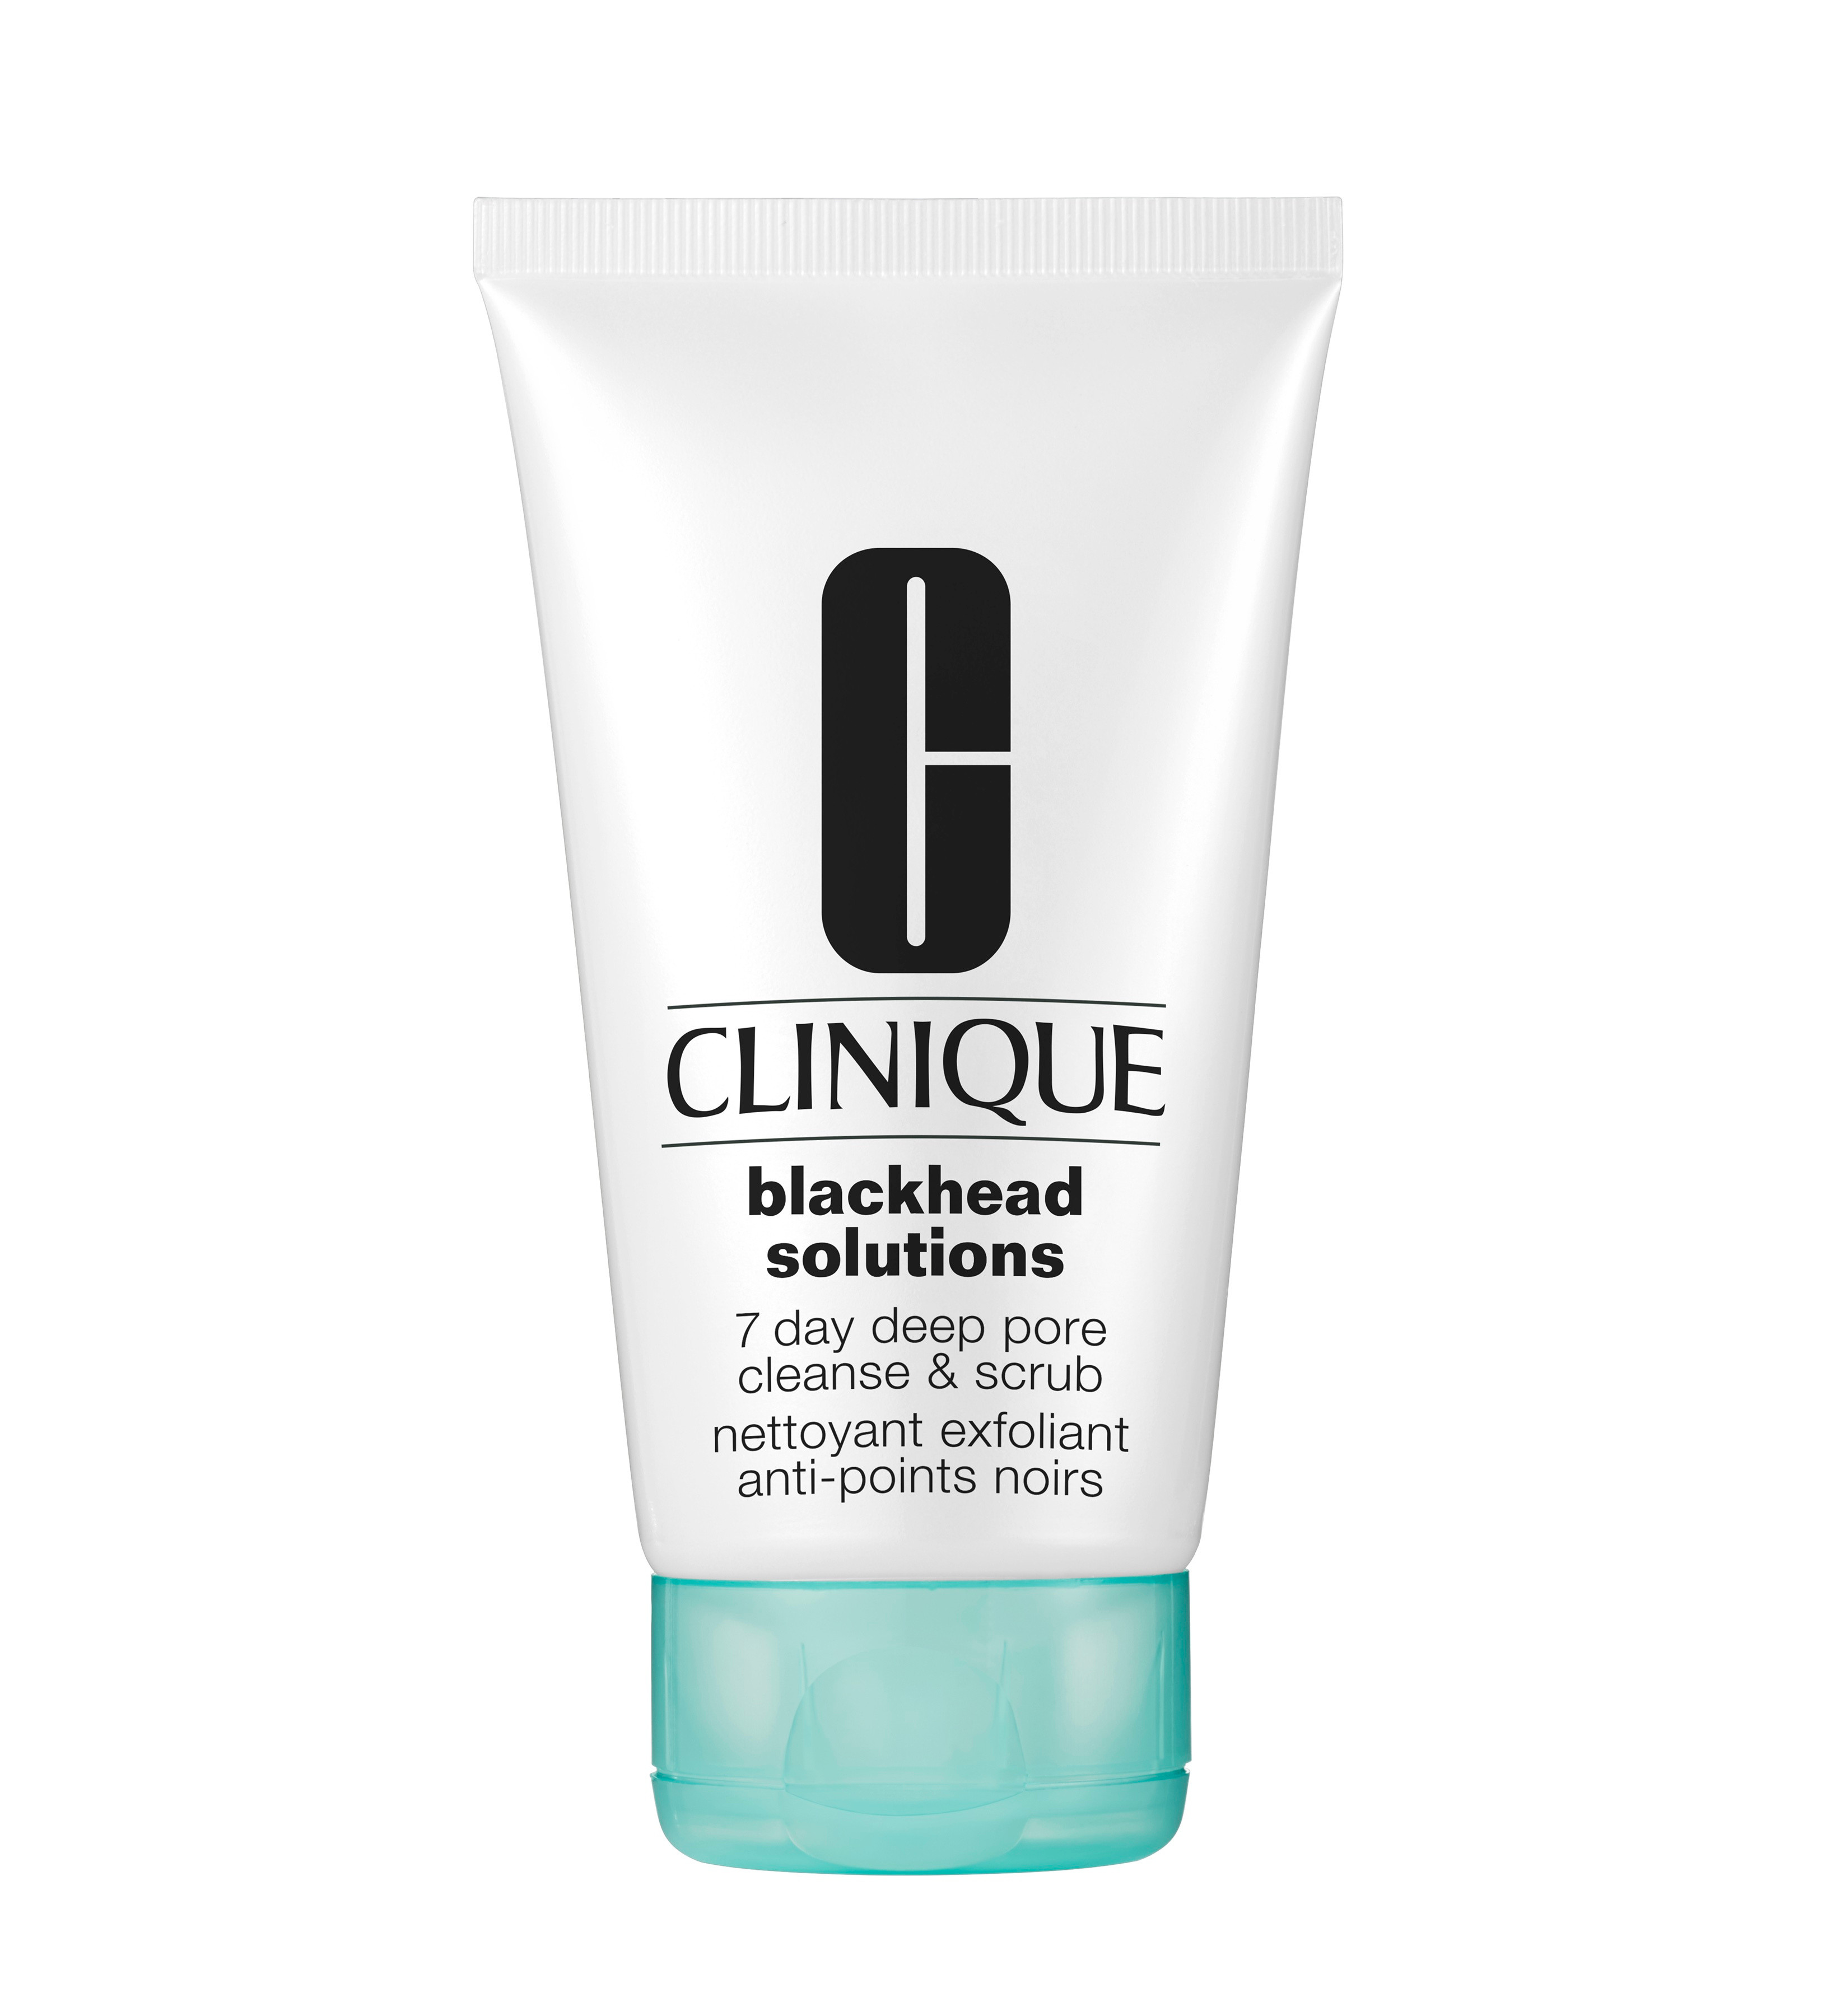 Clinique blackheads solutions 7 day deep pore cleanser & scrub 125 ml, Brown, large image number 0